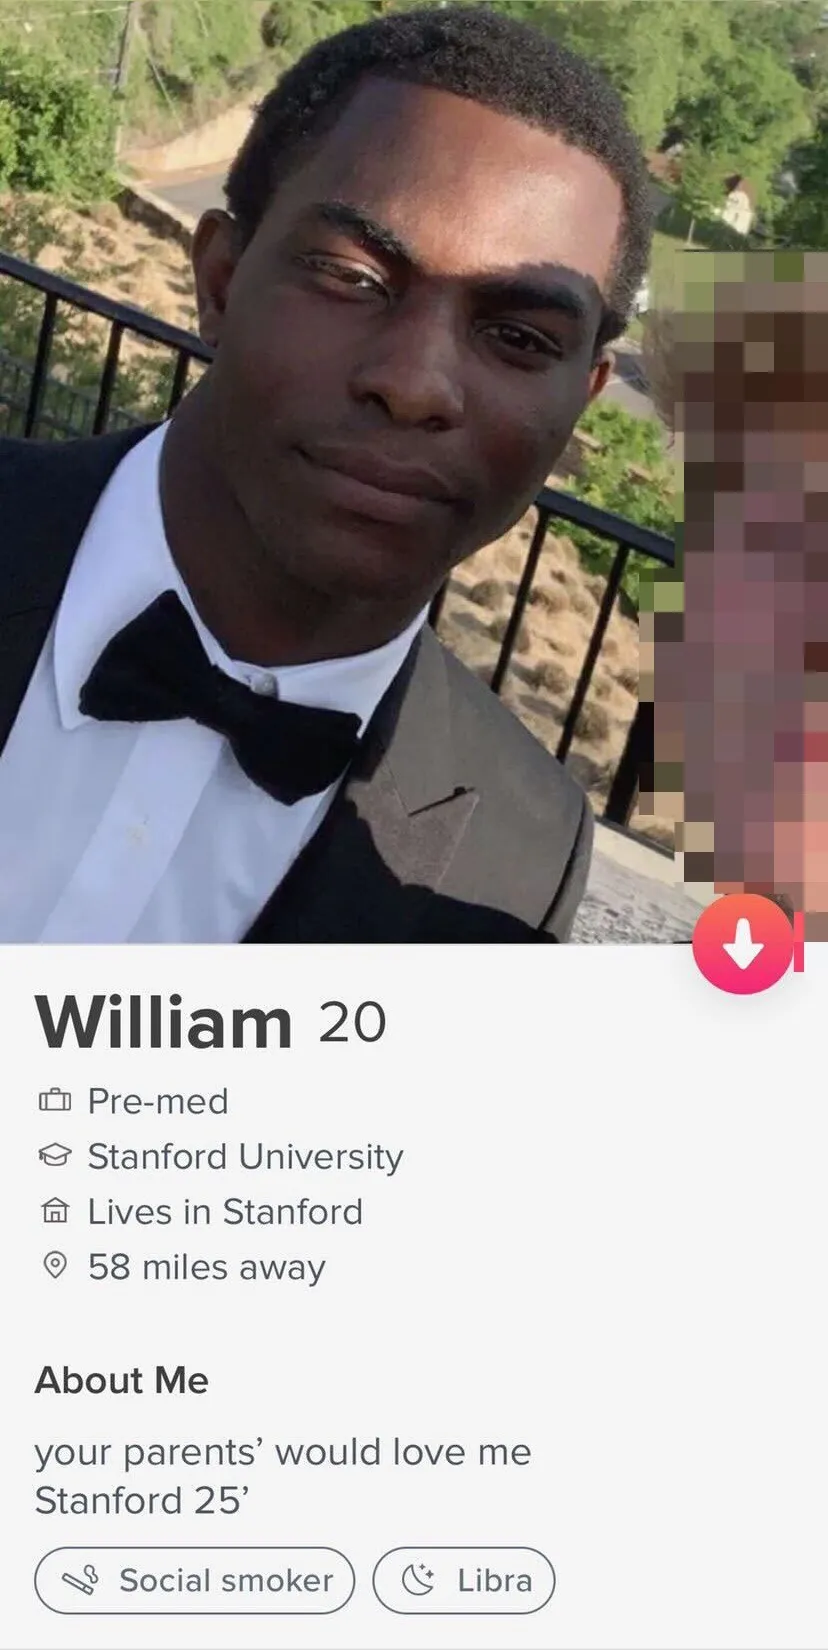 A Tinder profile for "William, 20, pre-med at Stanford." The profile says "your parents would love me." The photo shows a close up of Curry in a tux.